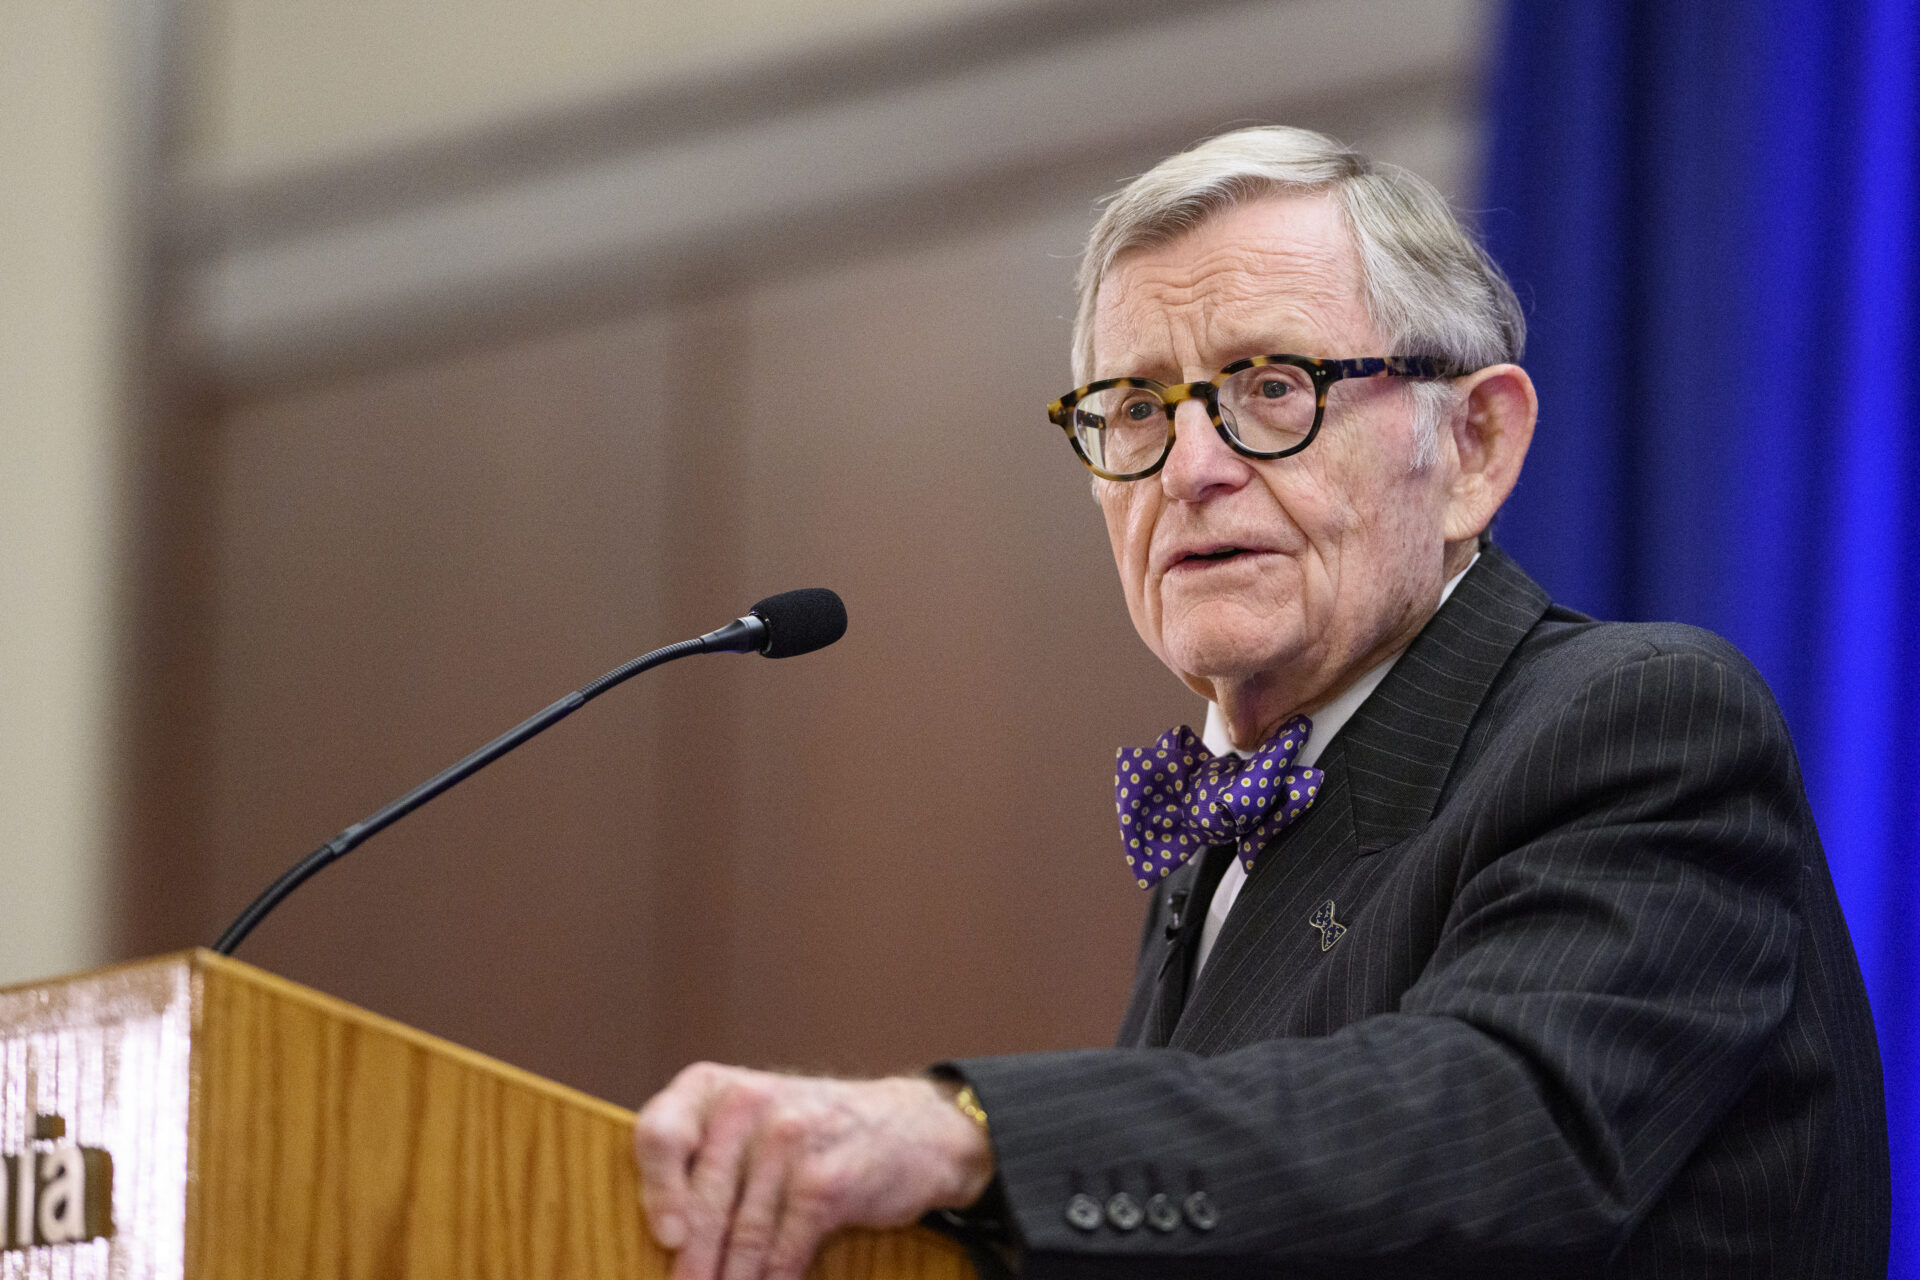 Gordon Gee stands with his hand on the side of a wooden lectern. He wears a black suit with a white shirt, dark purple bowtie and glasses. A microphone just into the center of frame in front of his face